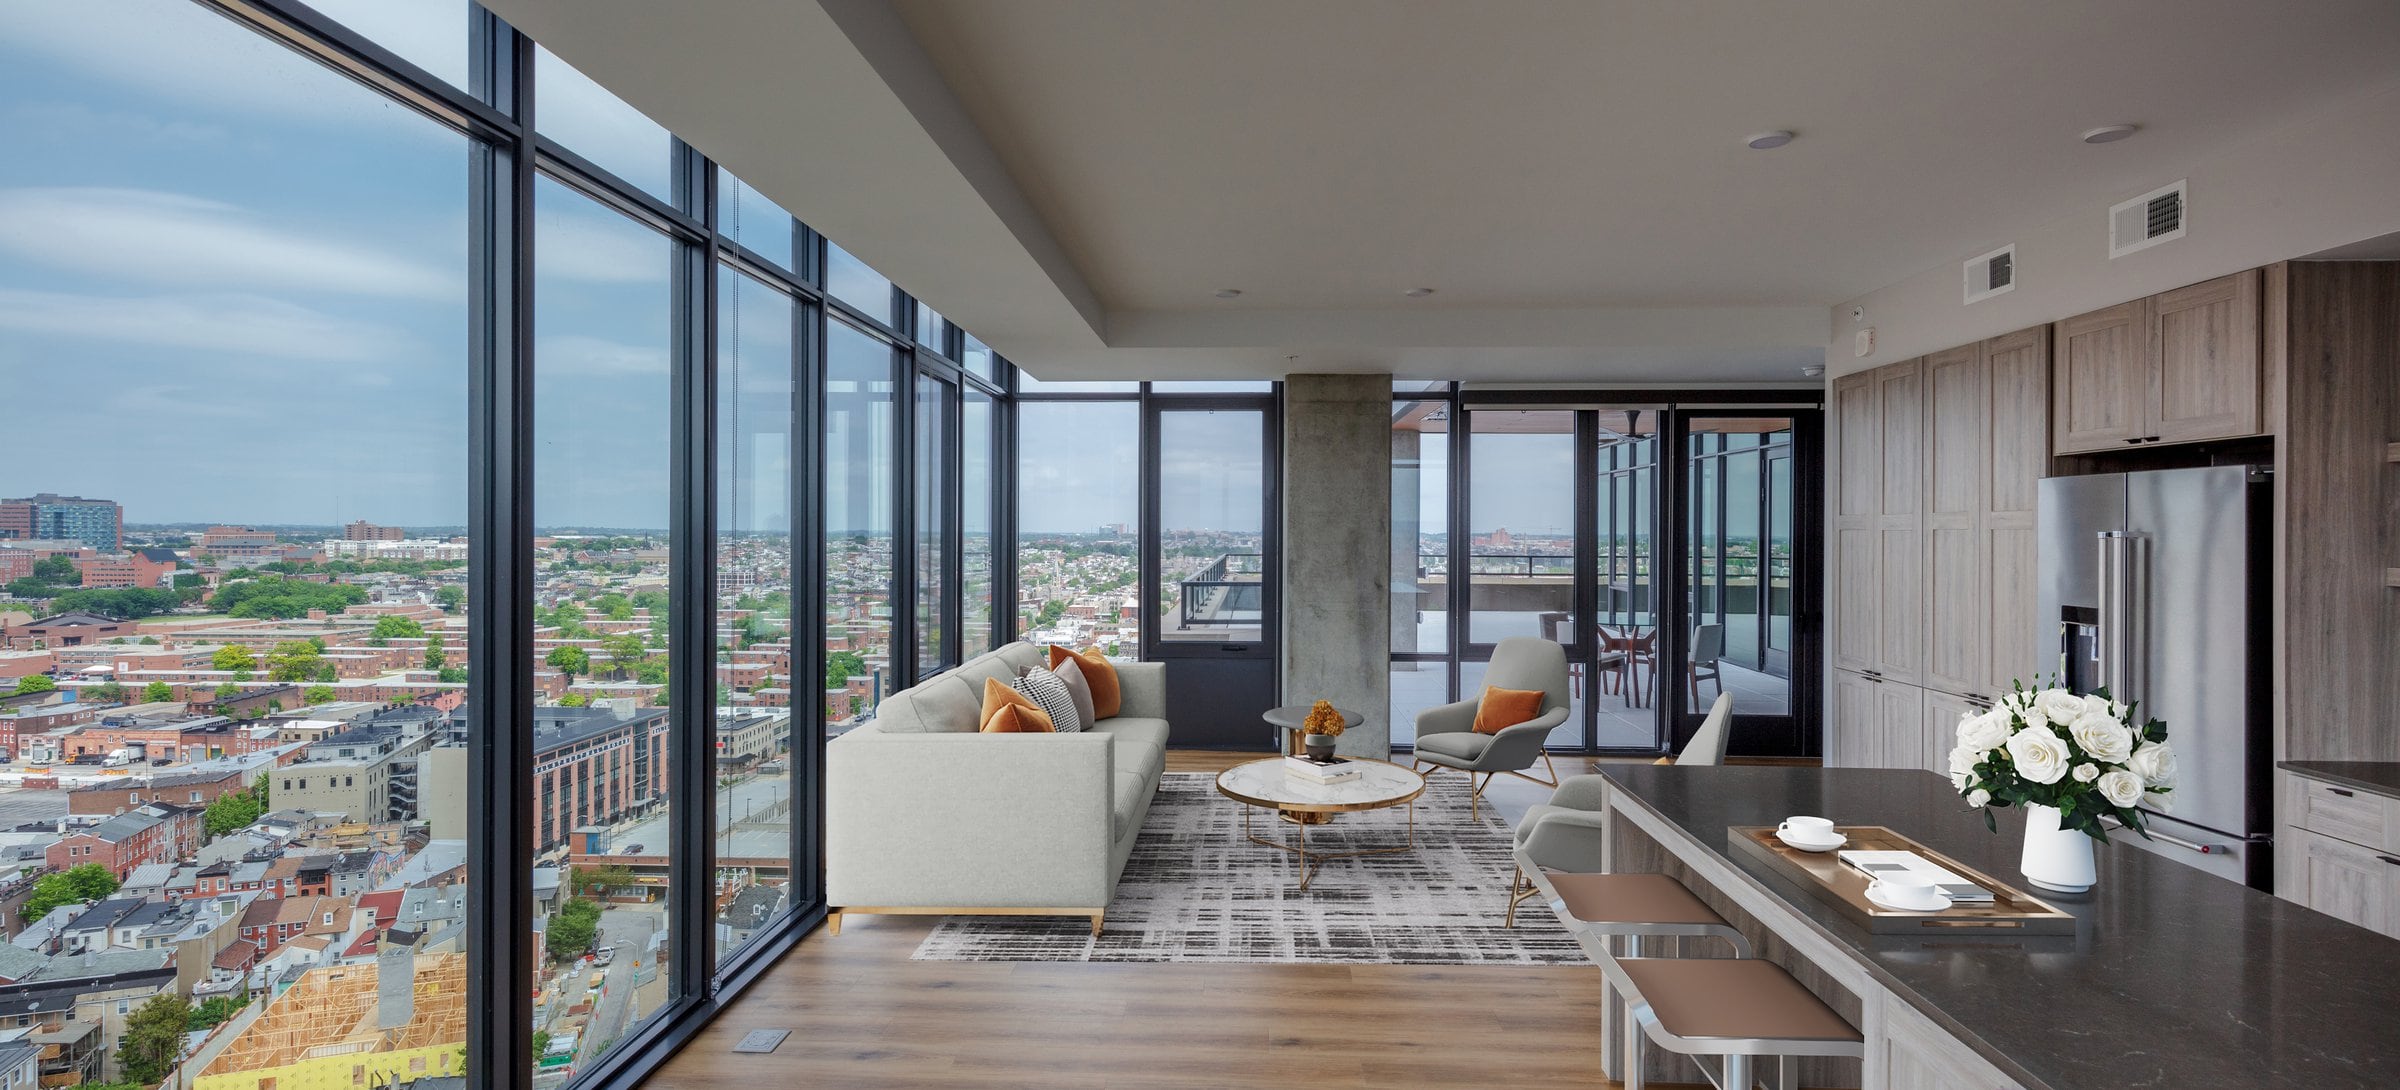 Penthouse-level Signature Collection apartment homes with floor-to-ceiling windows